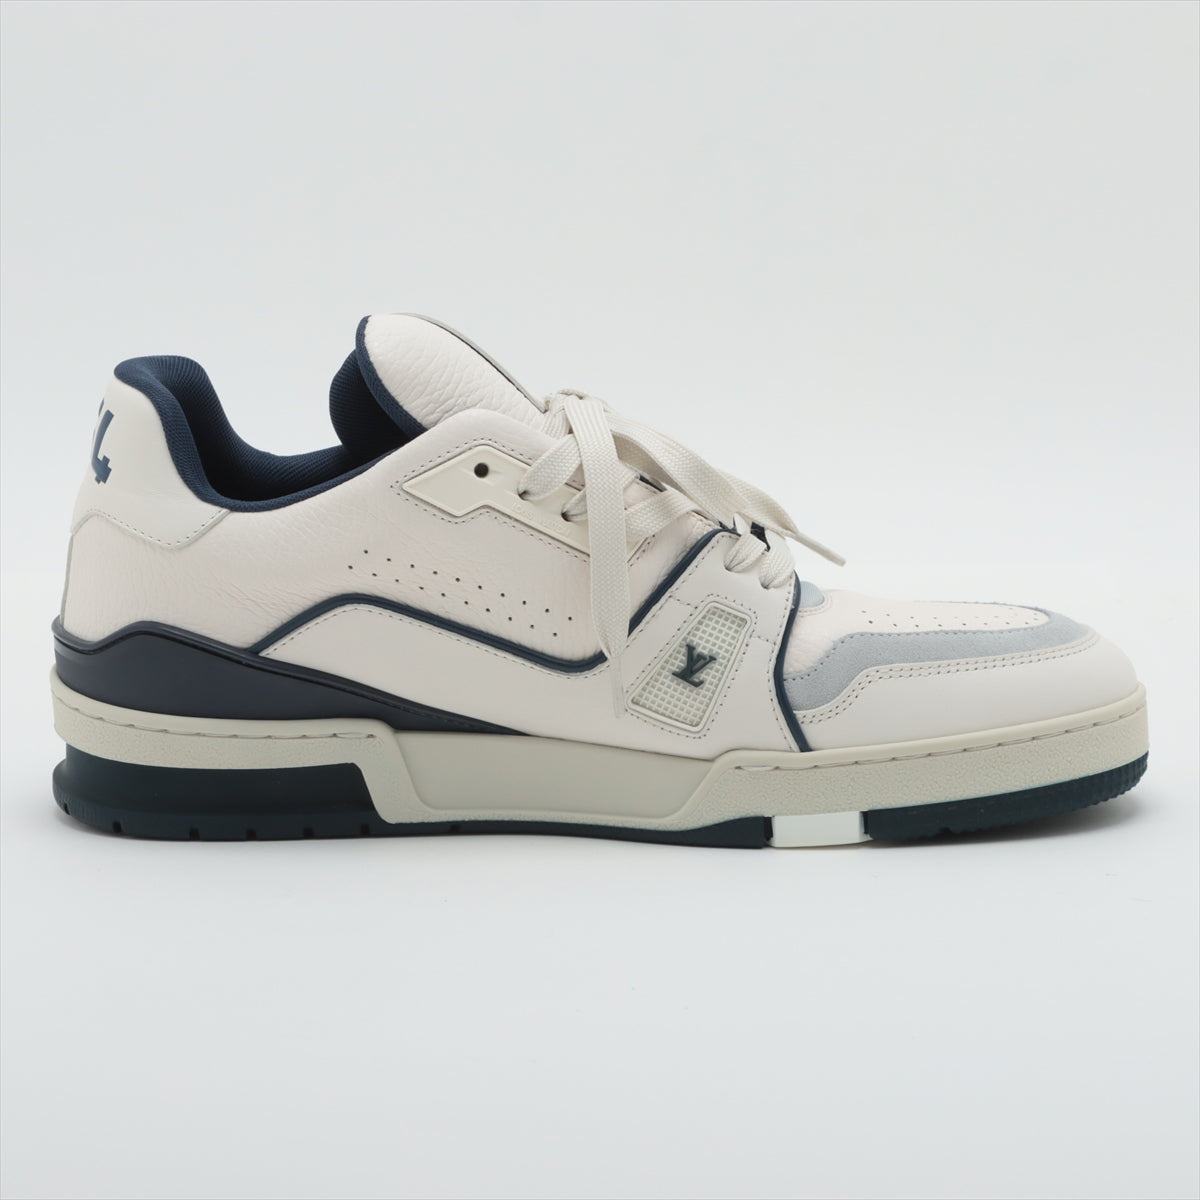 Louis Vuitton LV Trainer Line 23 years Leather & Suede Sneakers 7.5 Men's White x navy FD0213 box There is a storage bag